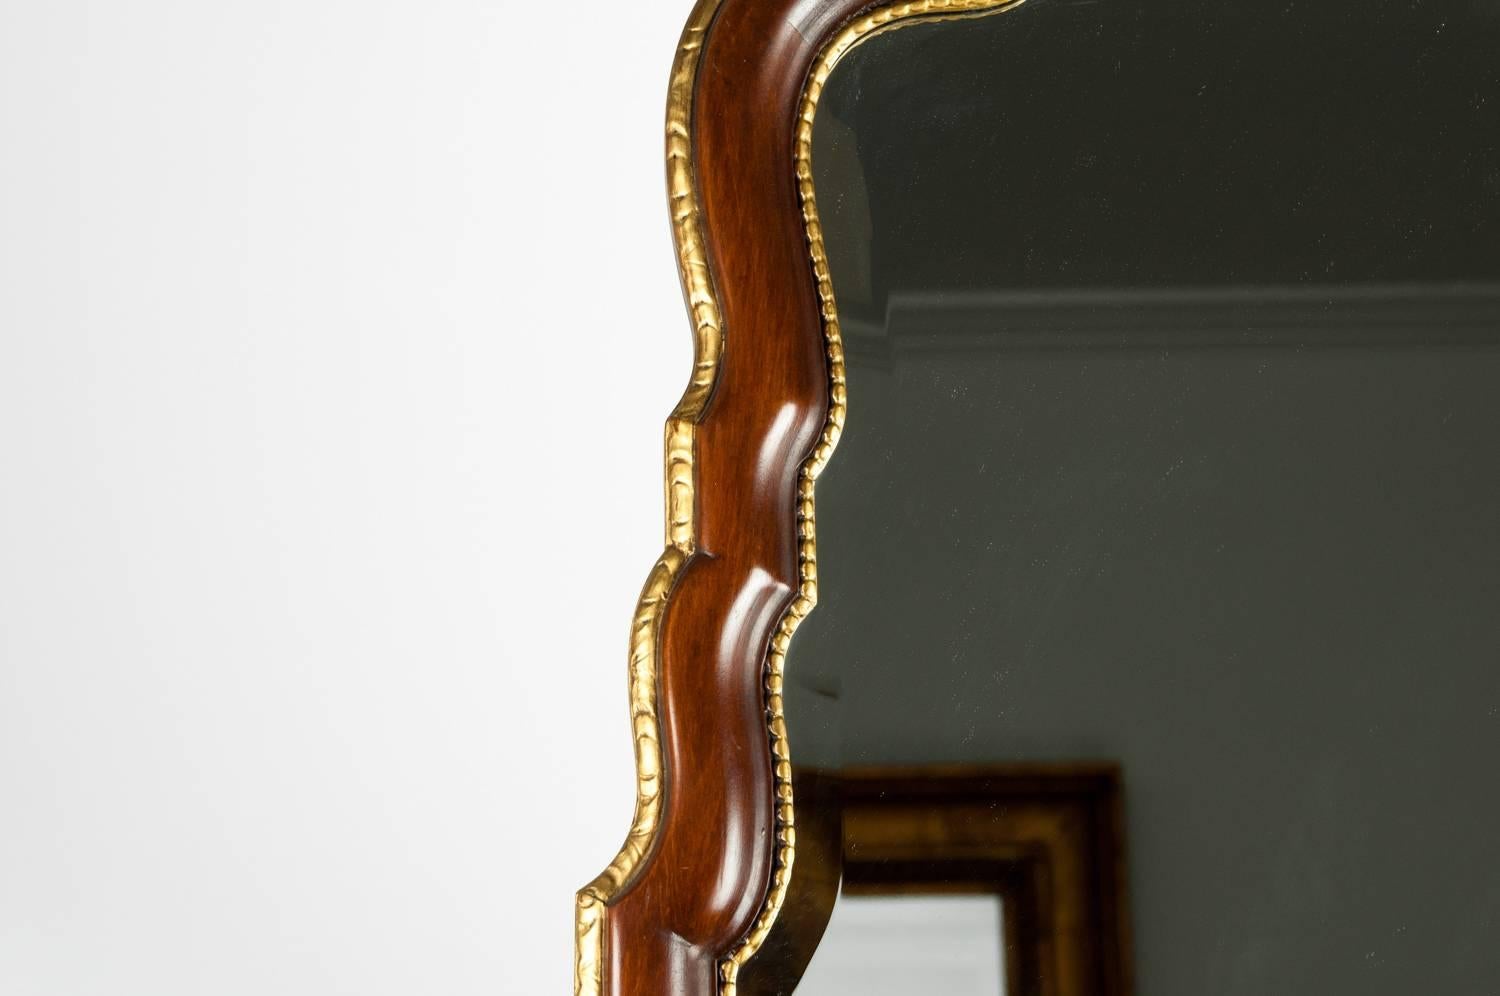 Vintage French style mahogany wood framed hanging wall mirror. The hanging mirror is in excellent vintage condition. The mirror measure about 59 inches long x 23.5 inches width.